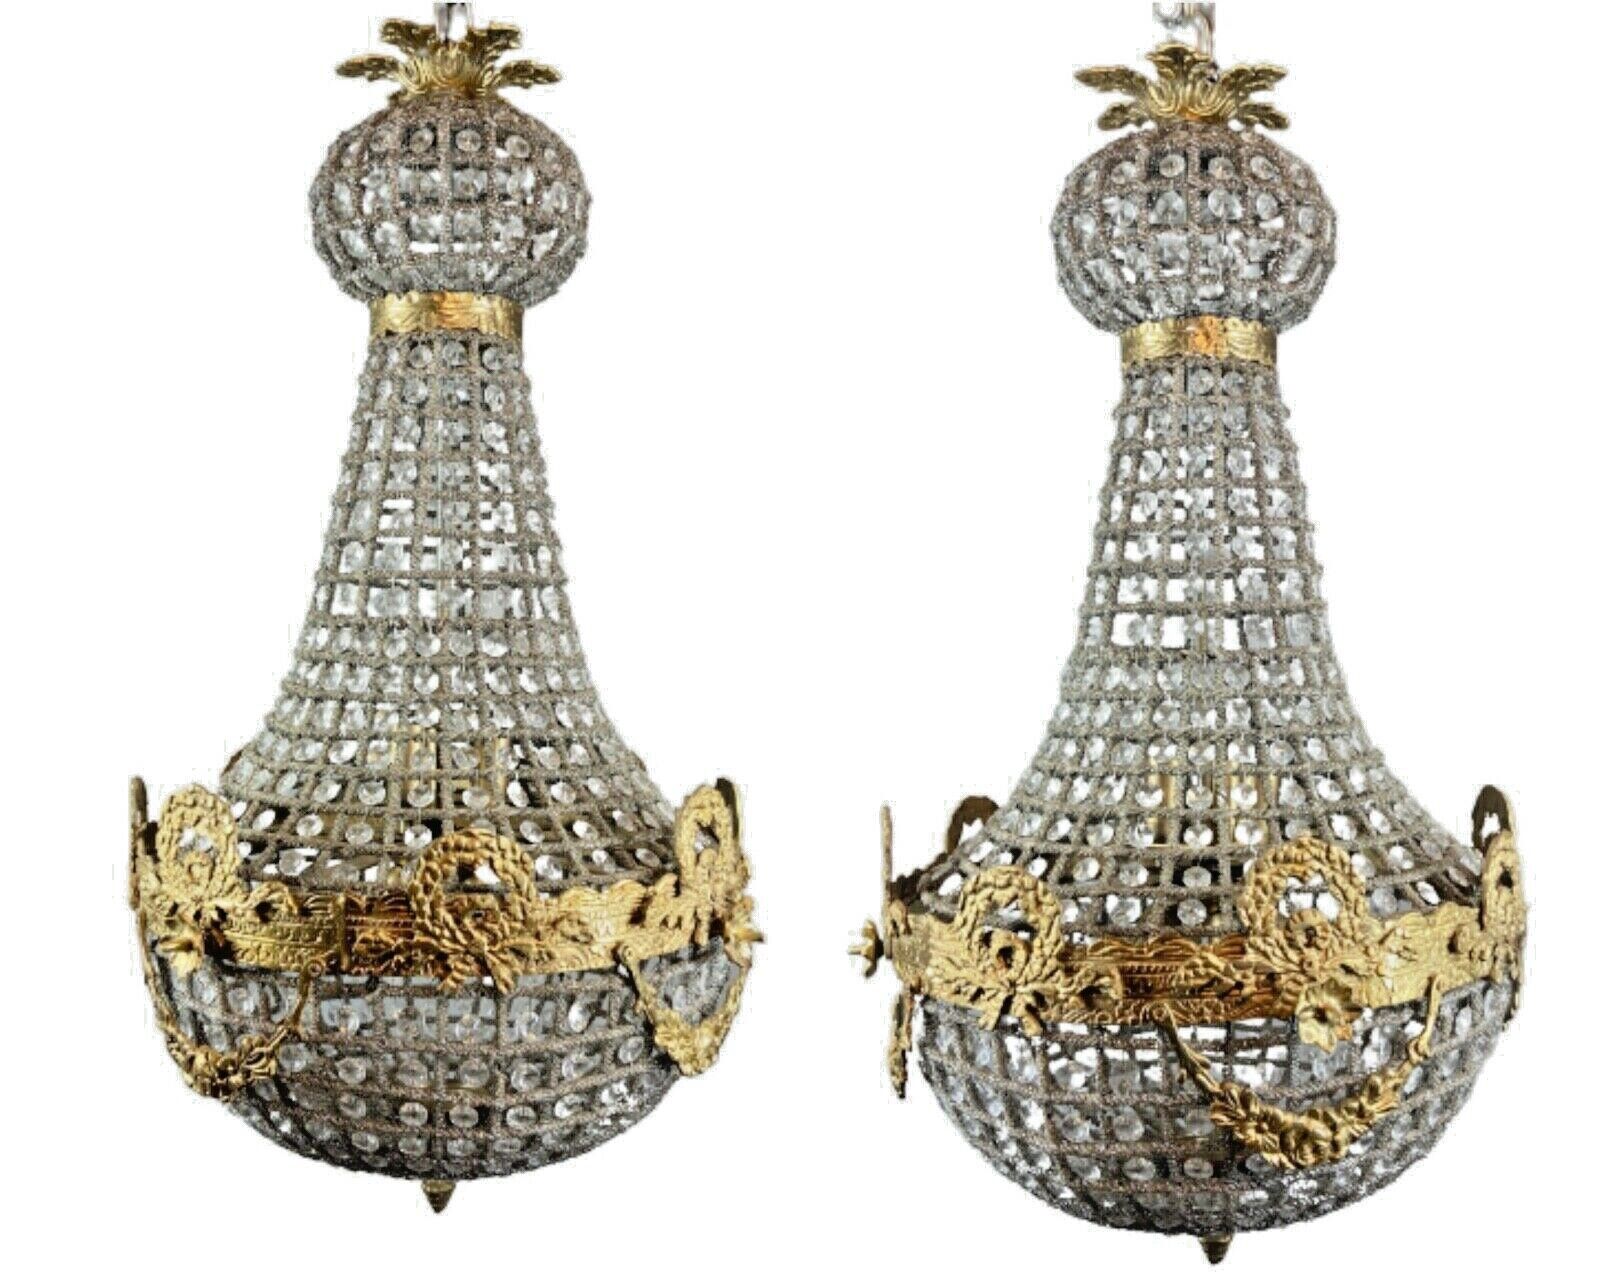 Pair of Vintage French Louis XVI Chandeliers: Bronze with Gold Leaf Accents